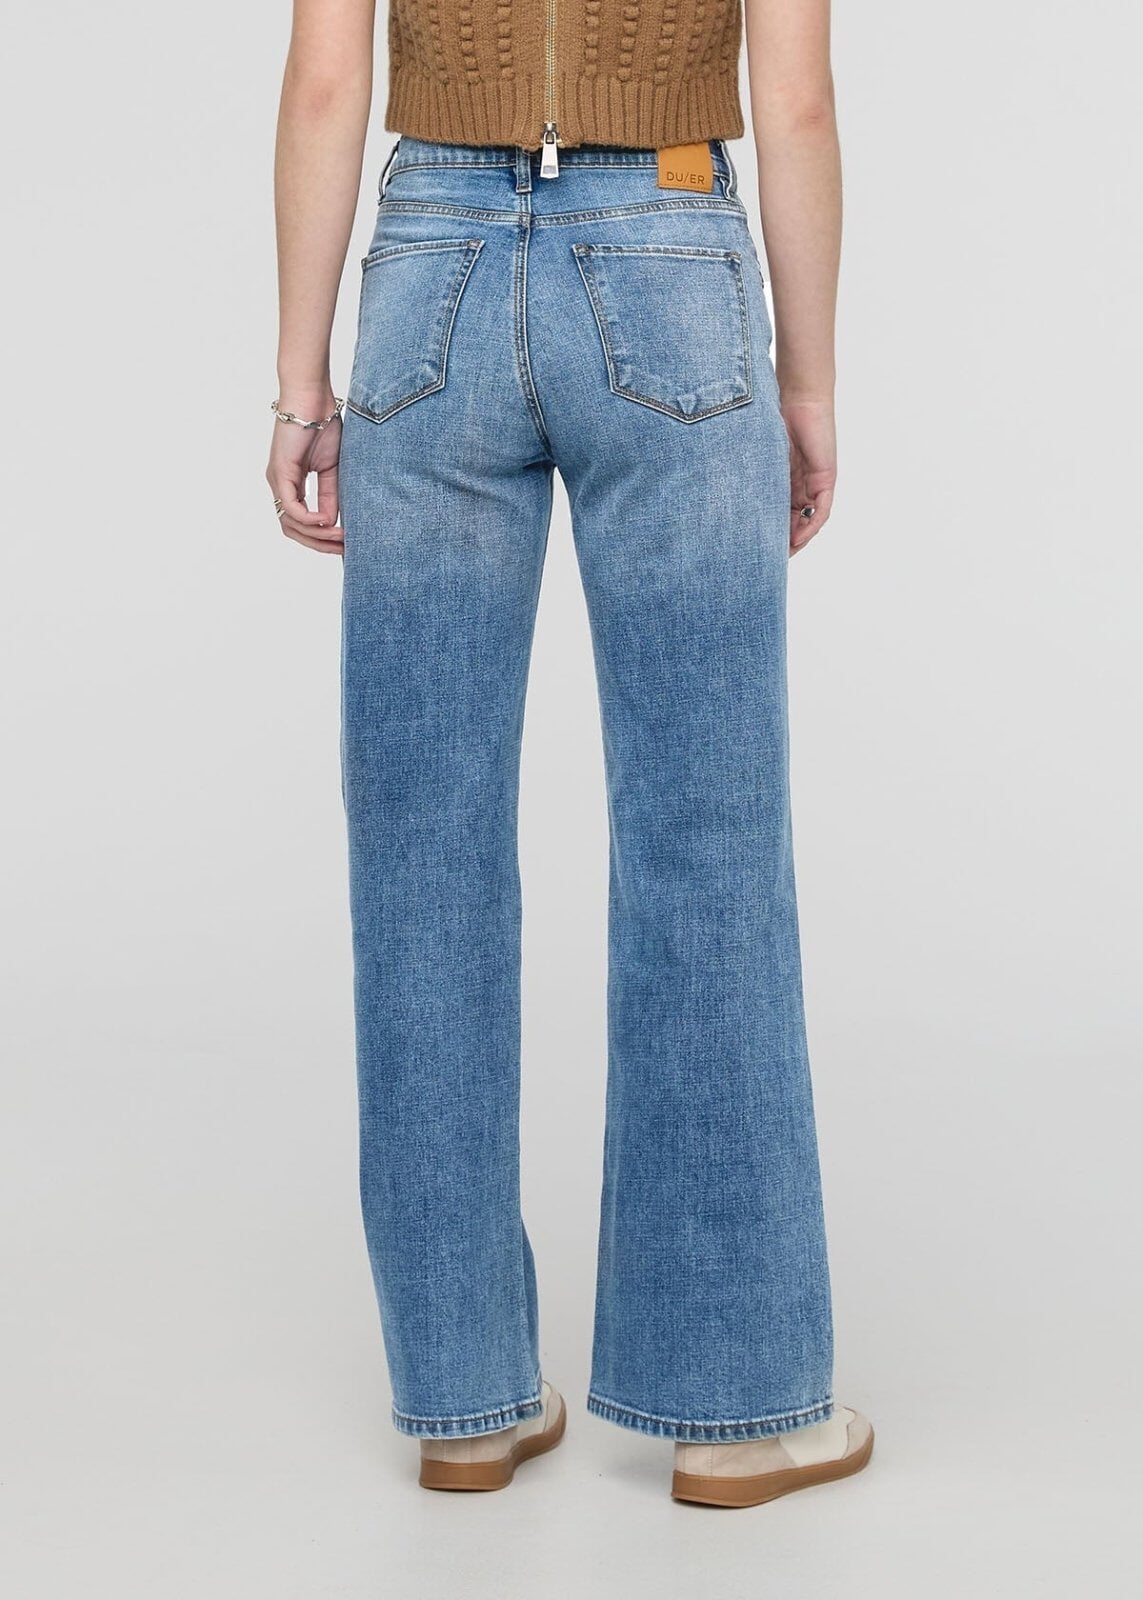 Buy Reelize - Plazo Jeans For Women, Knotted, Mid Waist